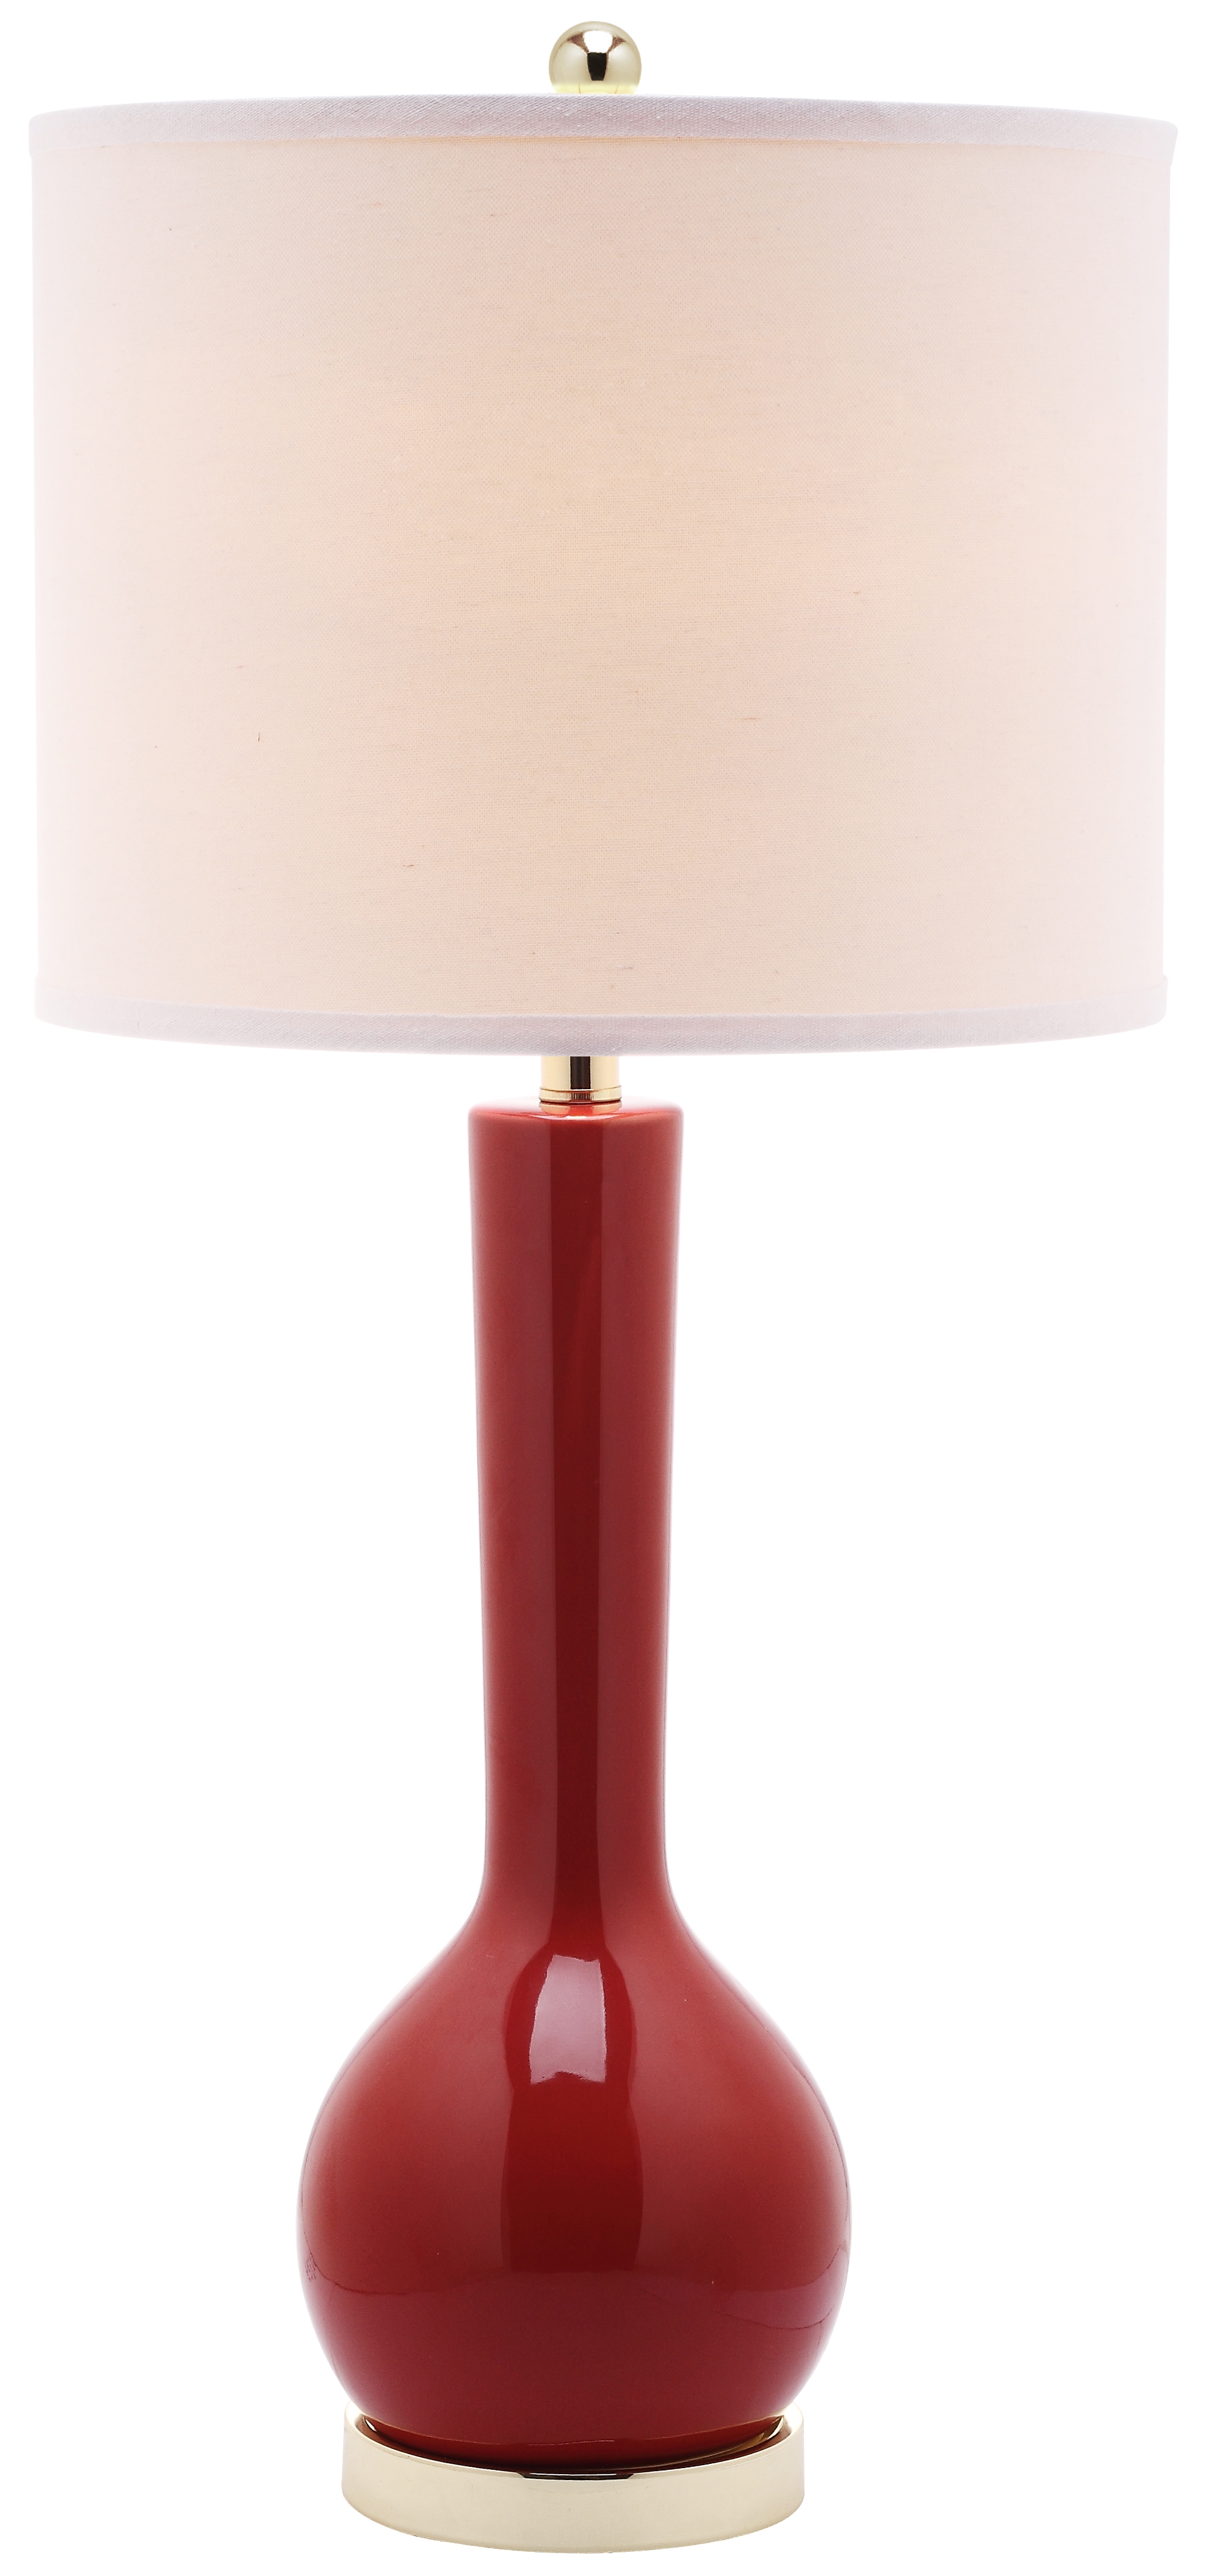 Mae 30.5-Inch H Long Neck Ceramic Table Lamp - Red - Arlo Home - Image 1